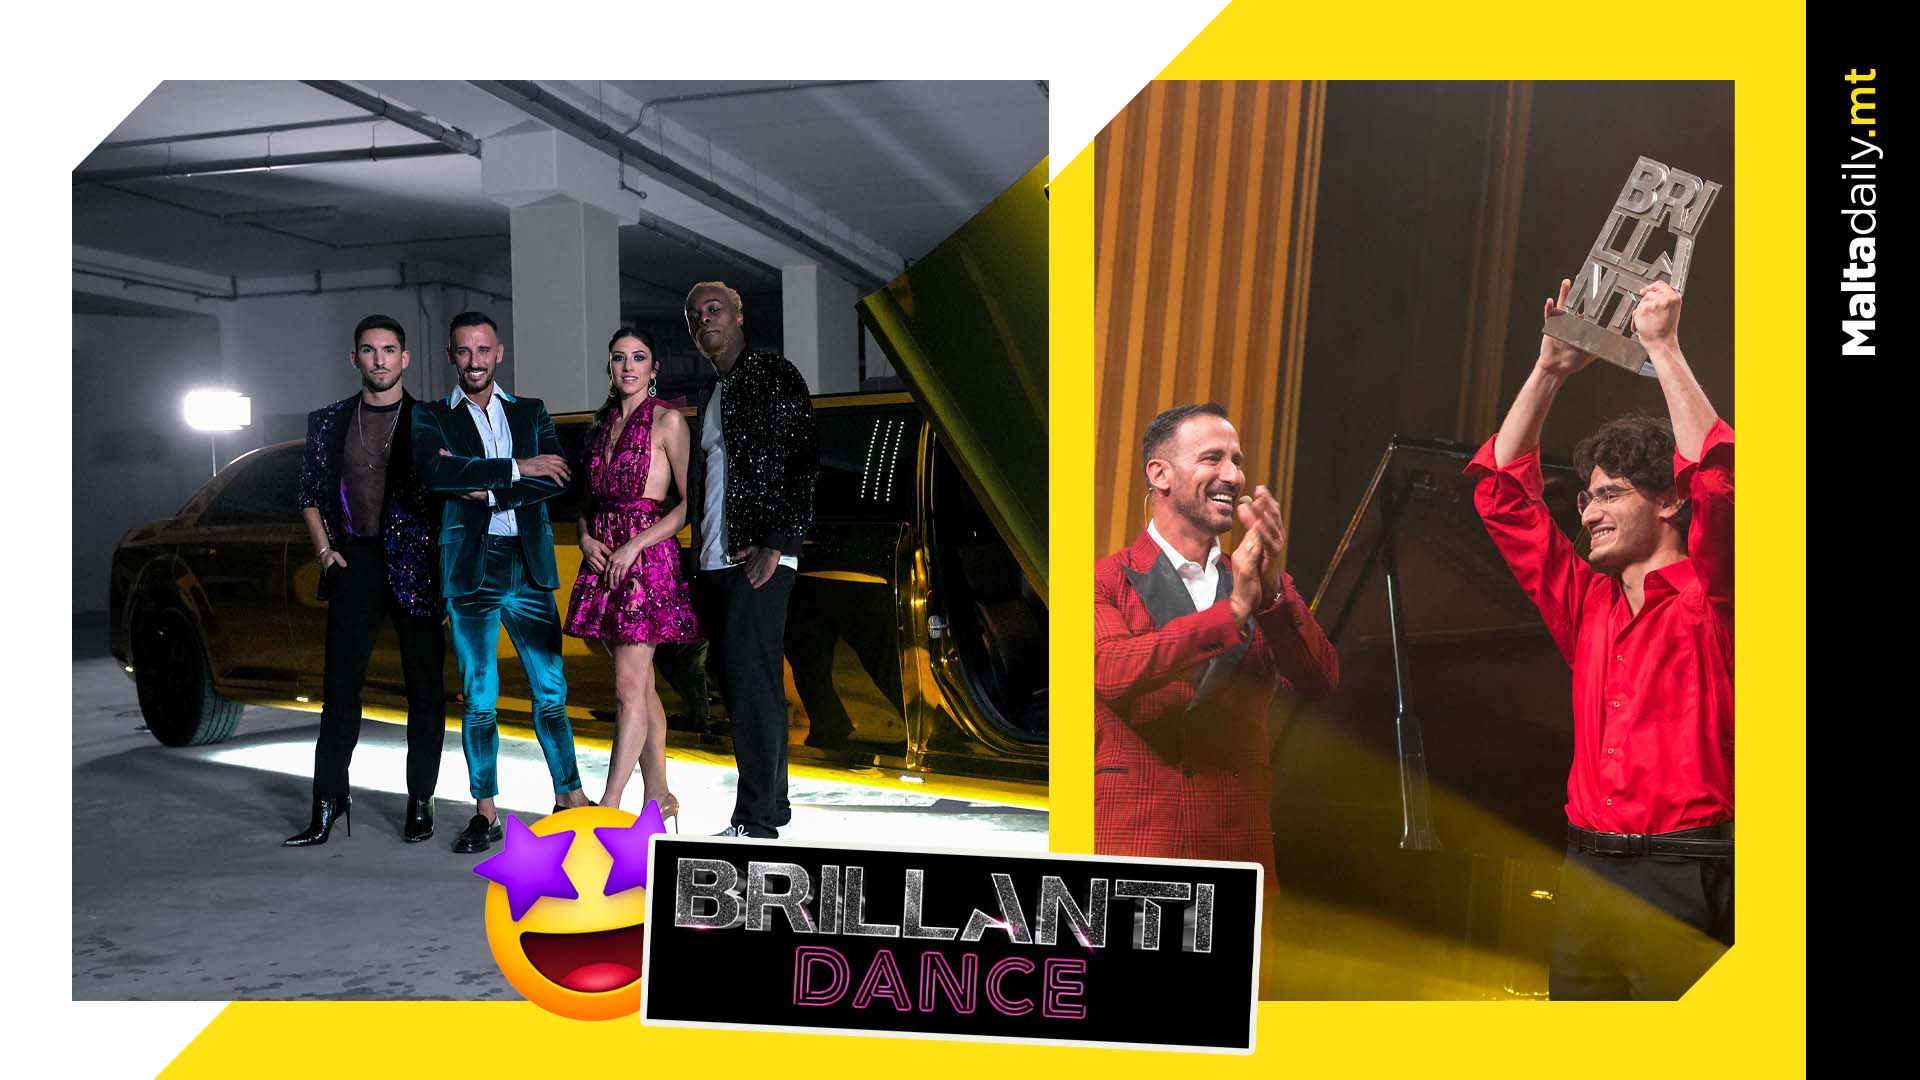 Brillanti is officially back! And this time it’s all about dance!